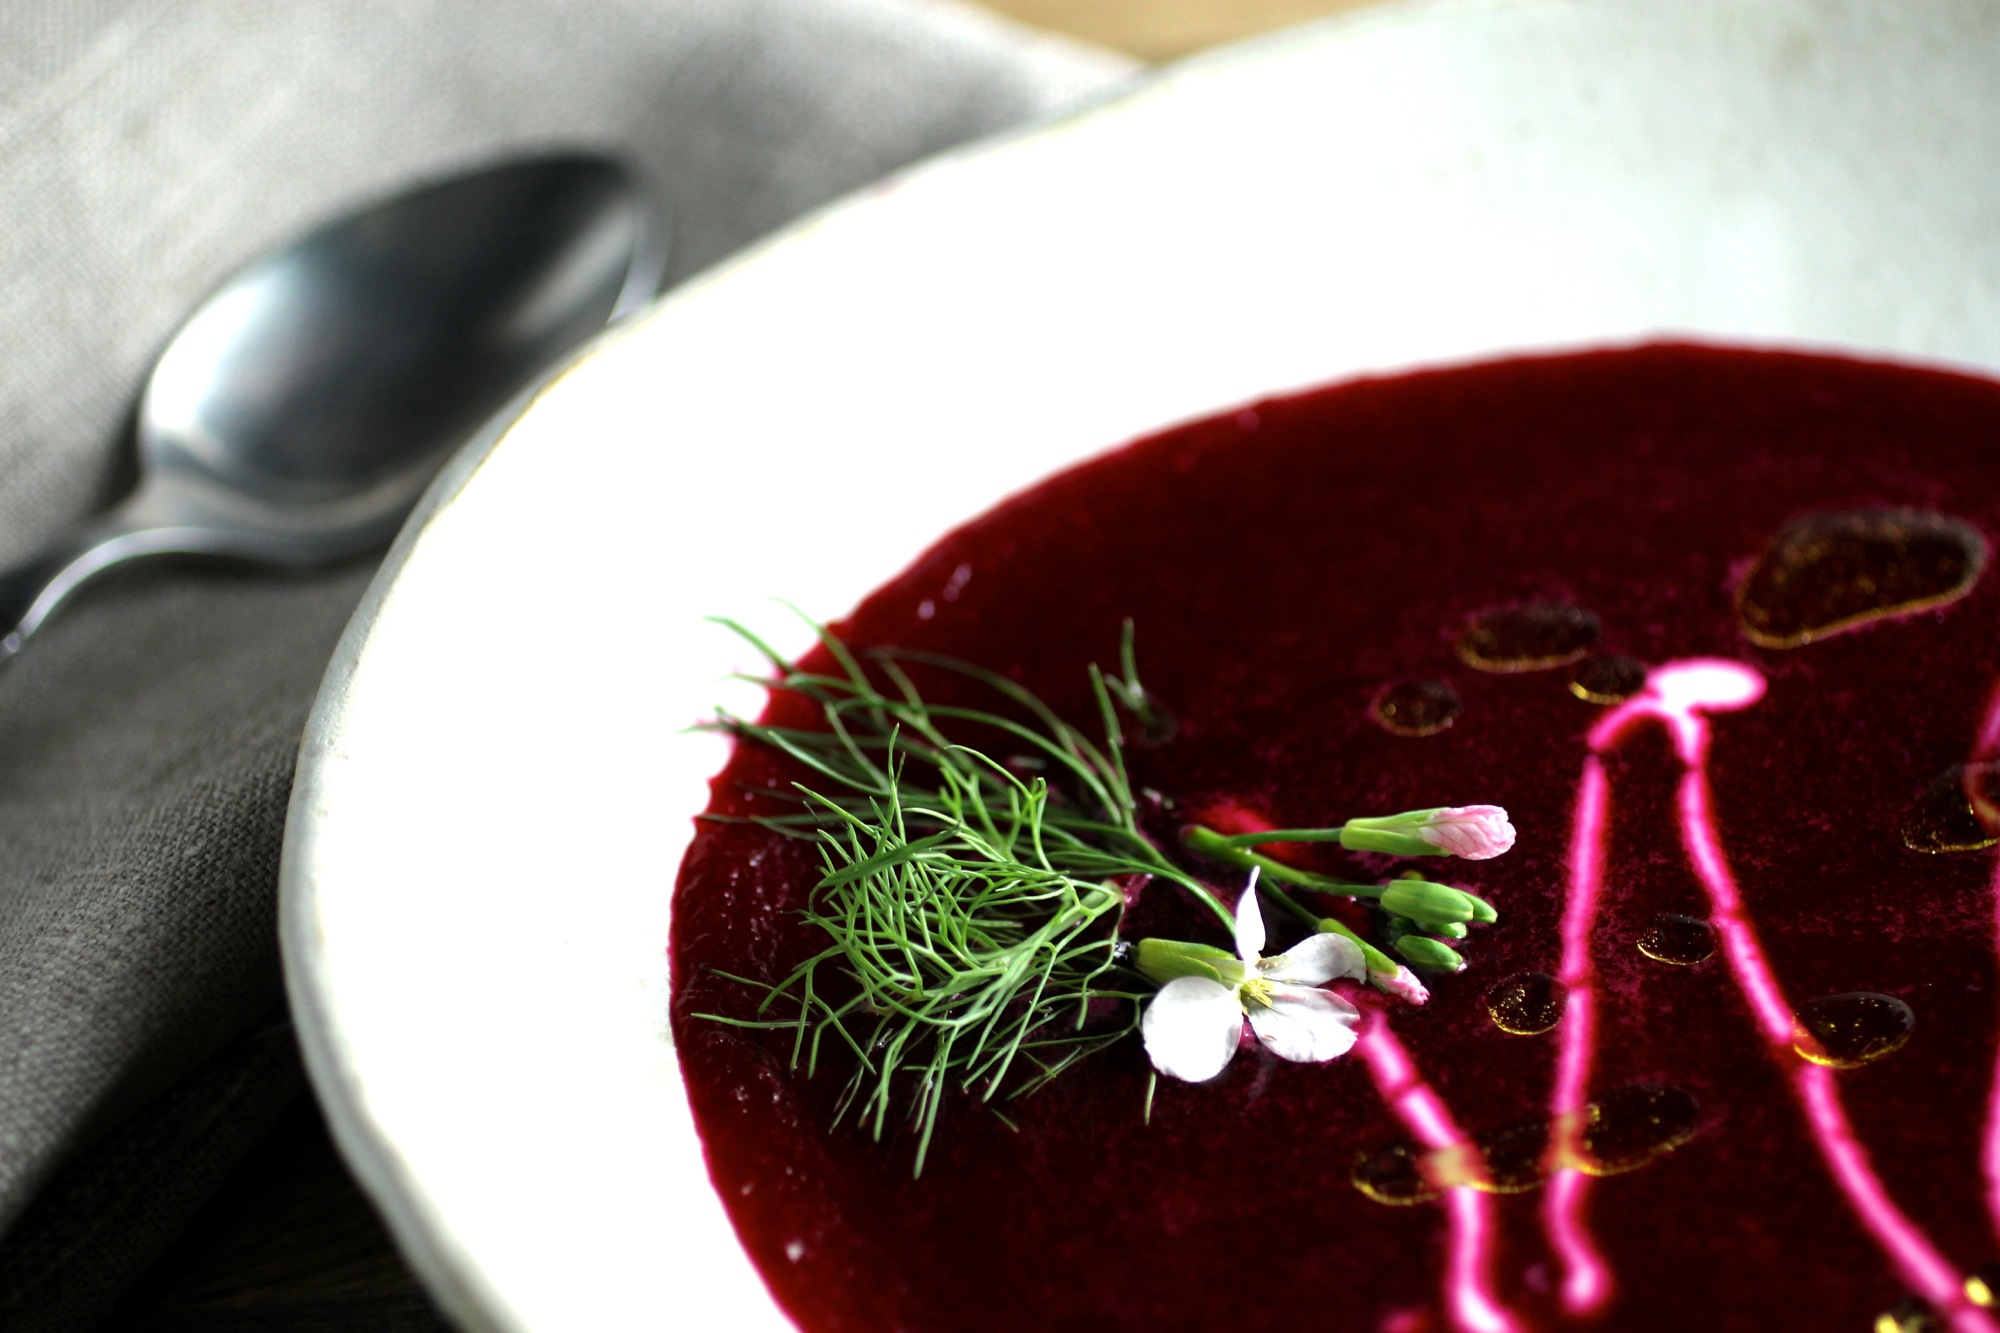 The dark red beetroot soup in this photo is complemented by radish flours, yogurt, and fennel fronds.